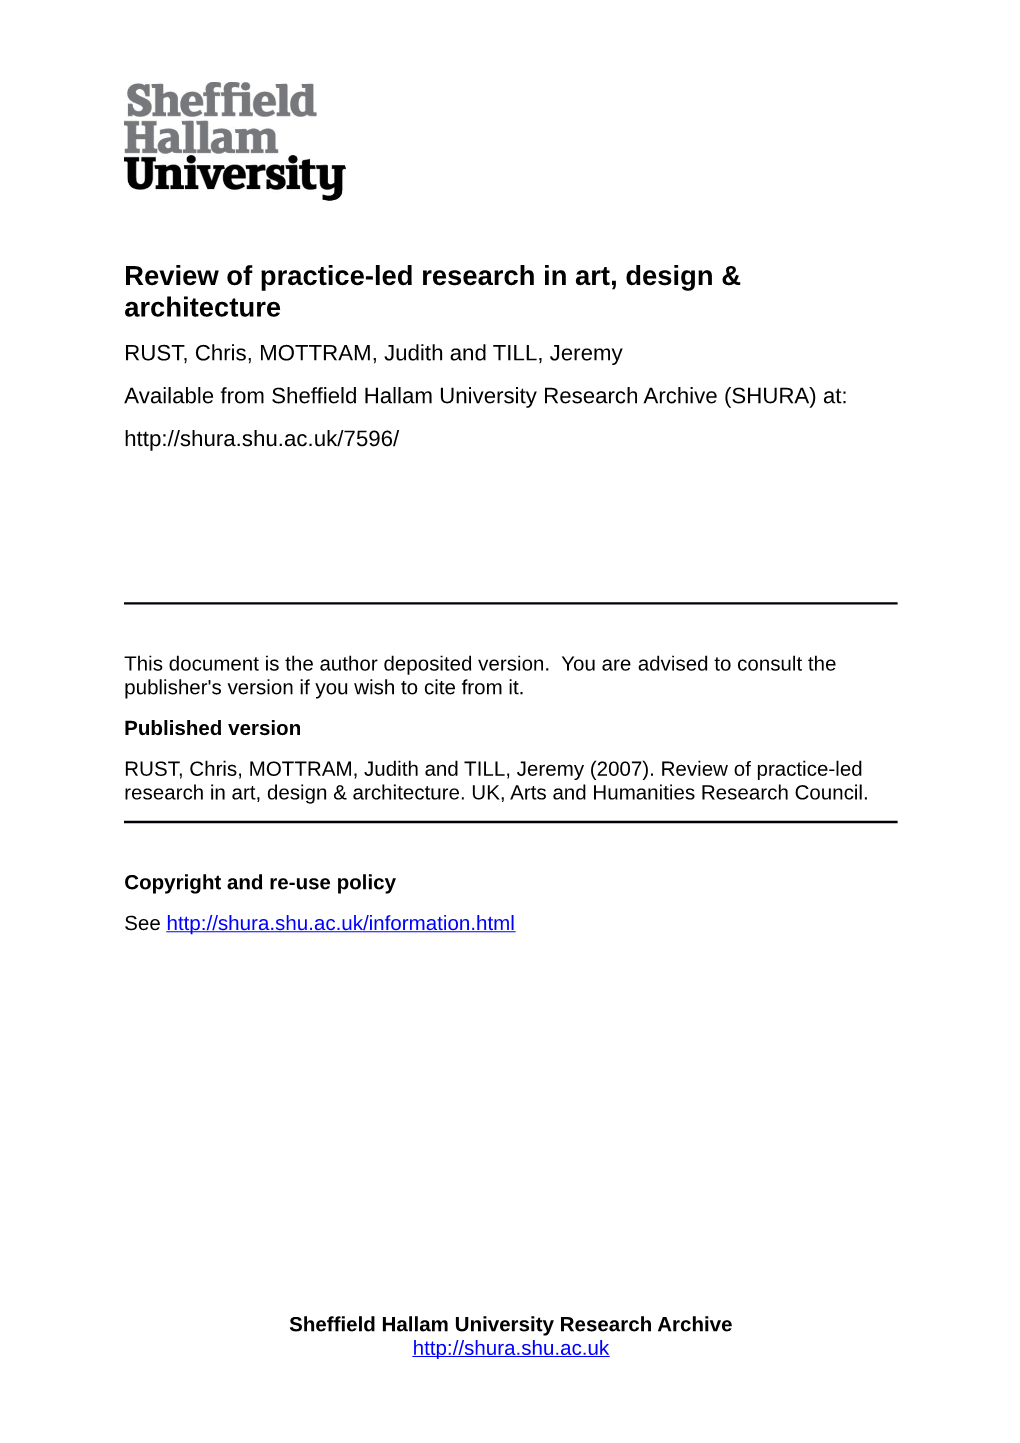 Review of Practice-Led Research in Art, Design & Architecture